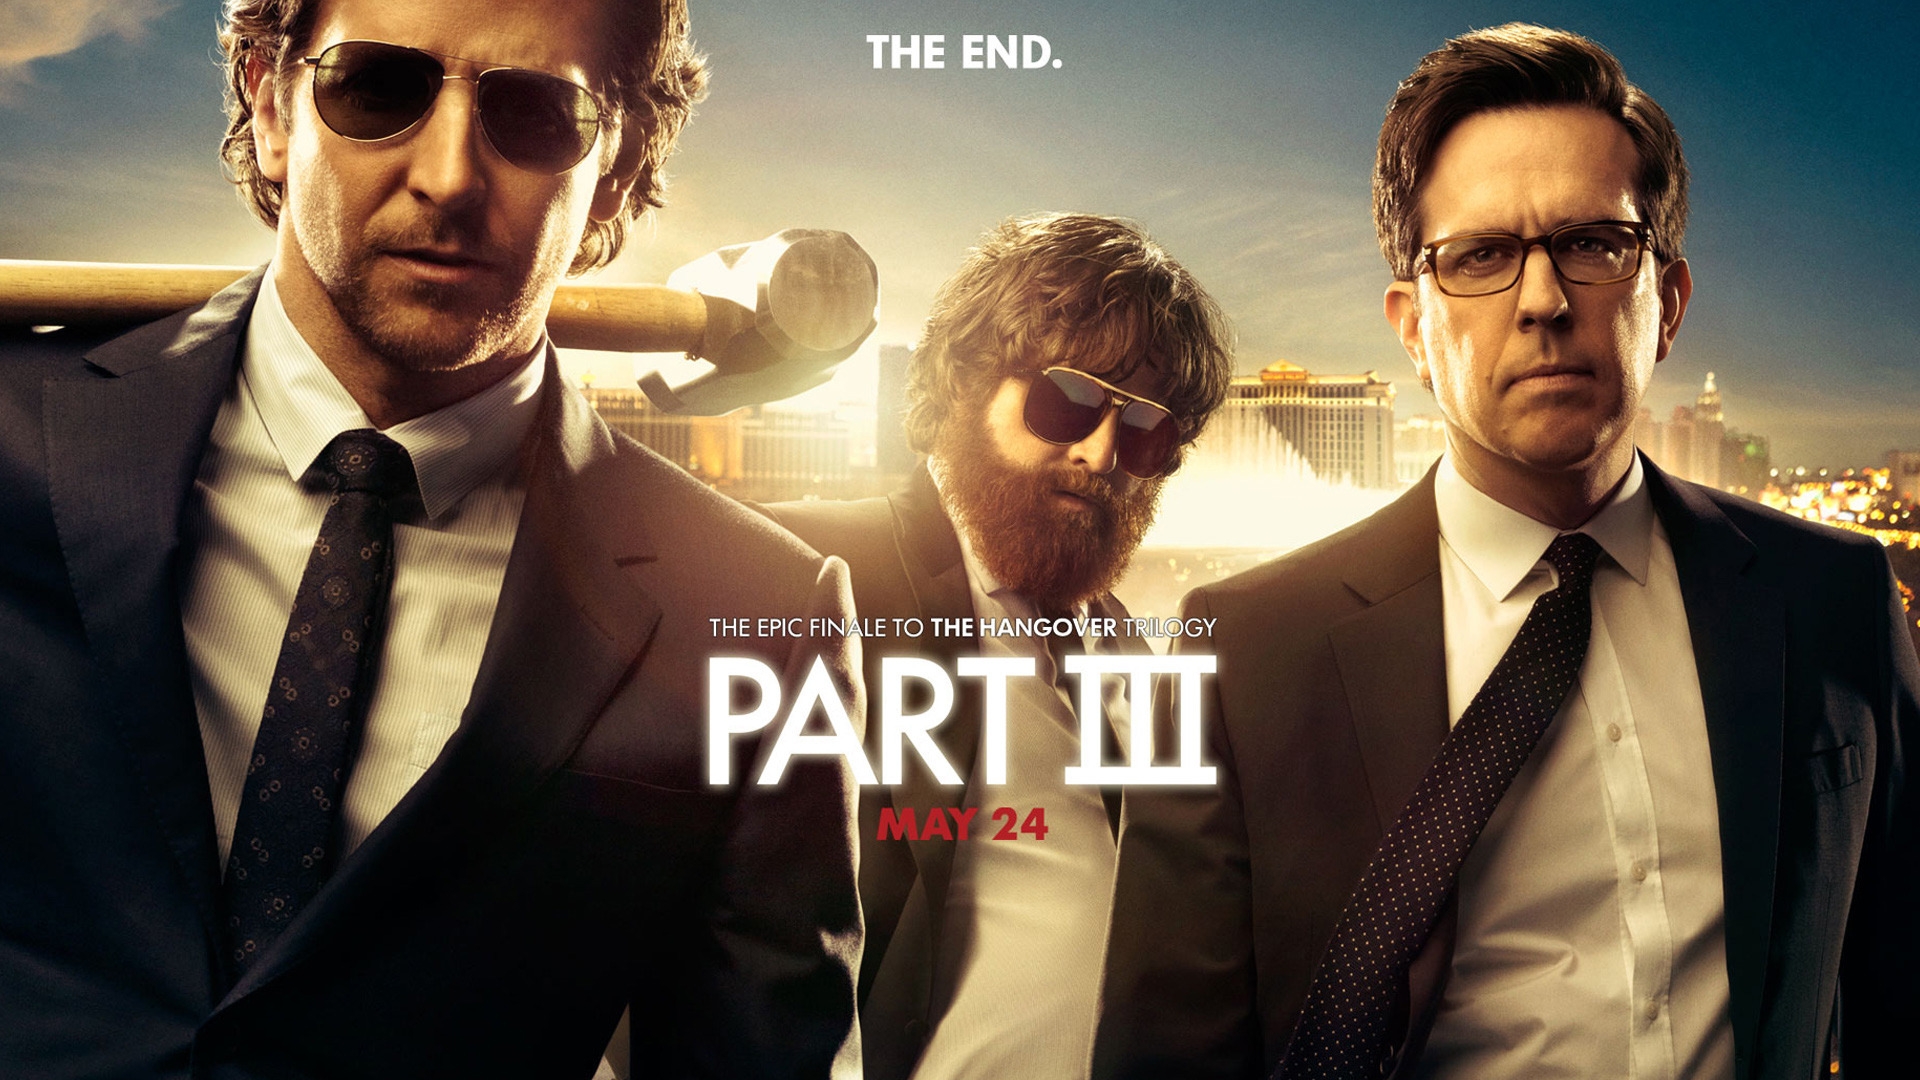 The Hangover 3 for 1920 x 1080 HDTV 1080p resolution